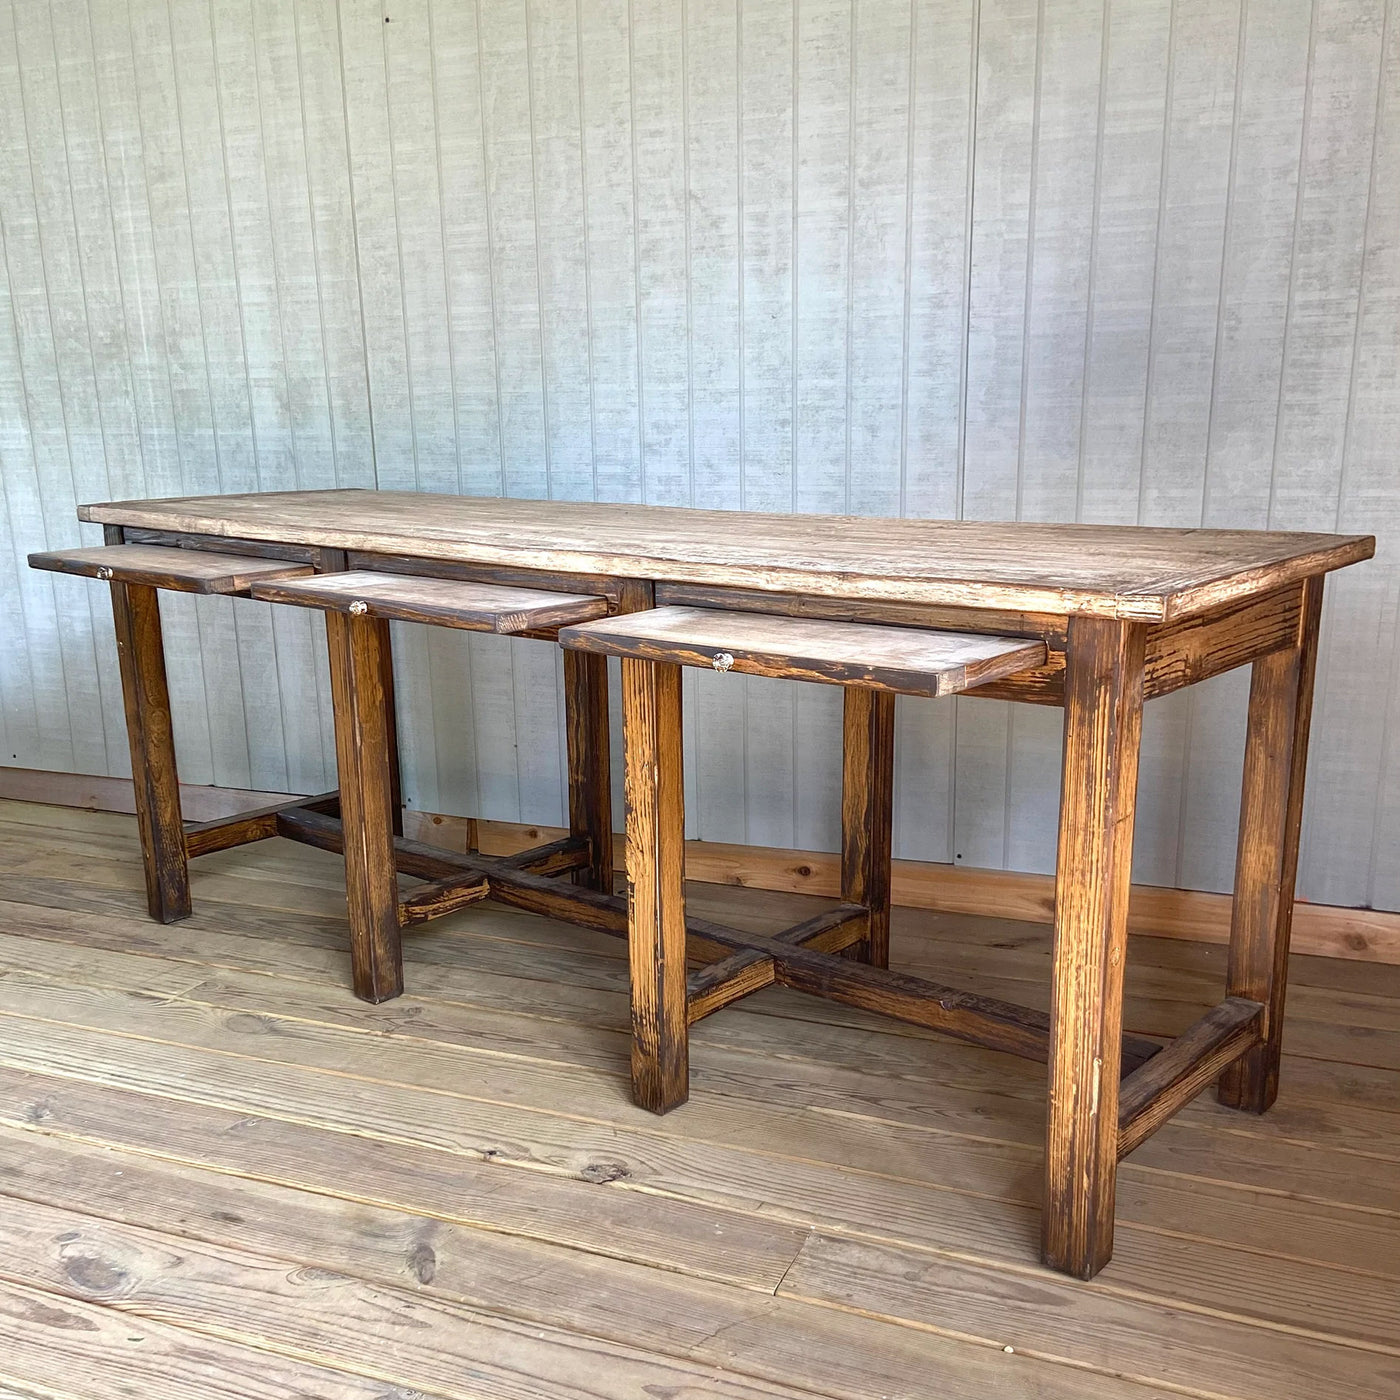 Rustic Library Table